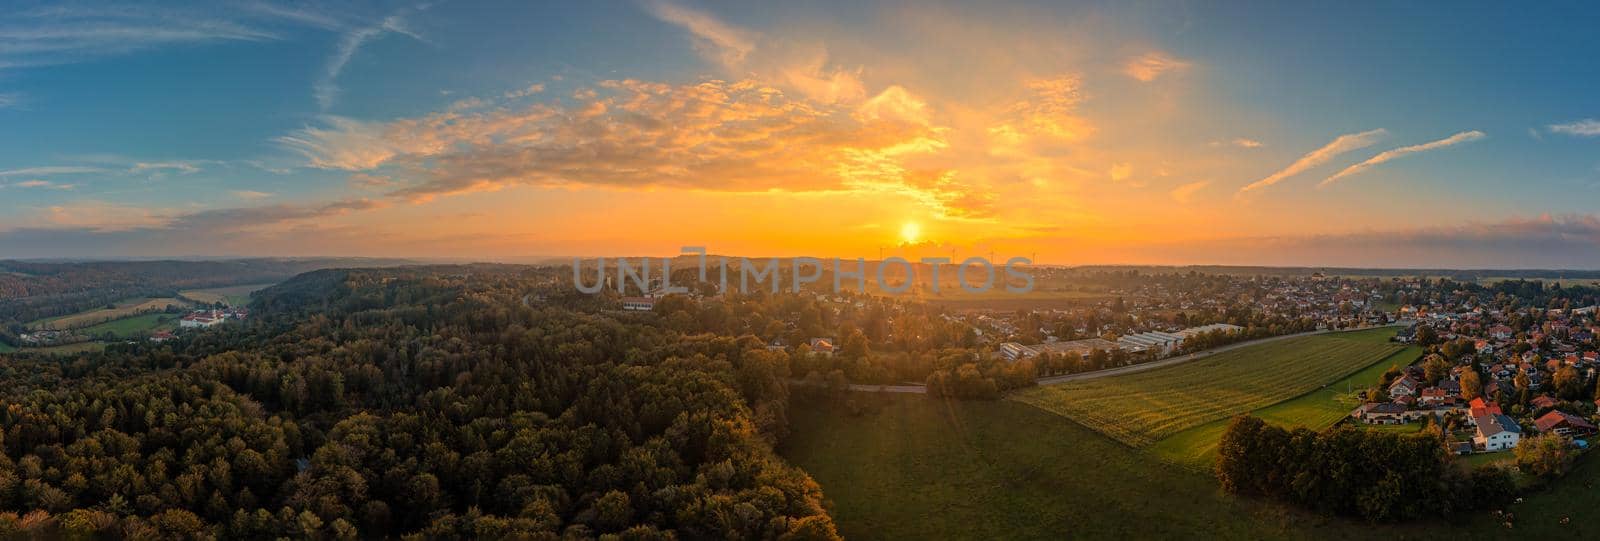 Sunset view over the beautiful landscape in southern bavaria with the monastery of Schaeftlarn